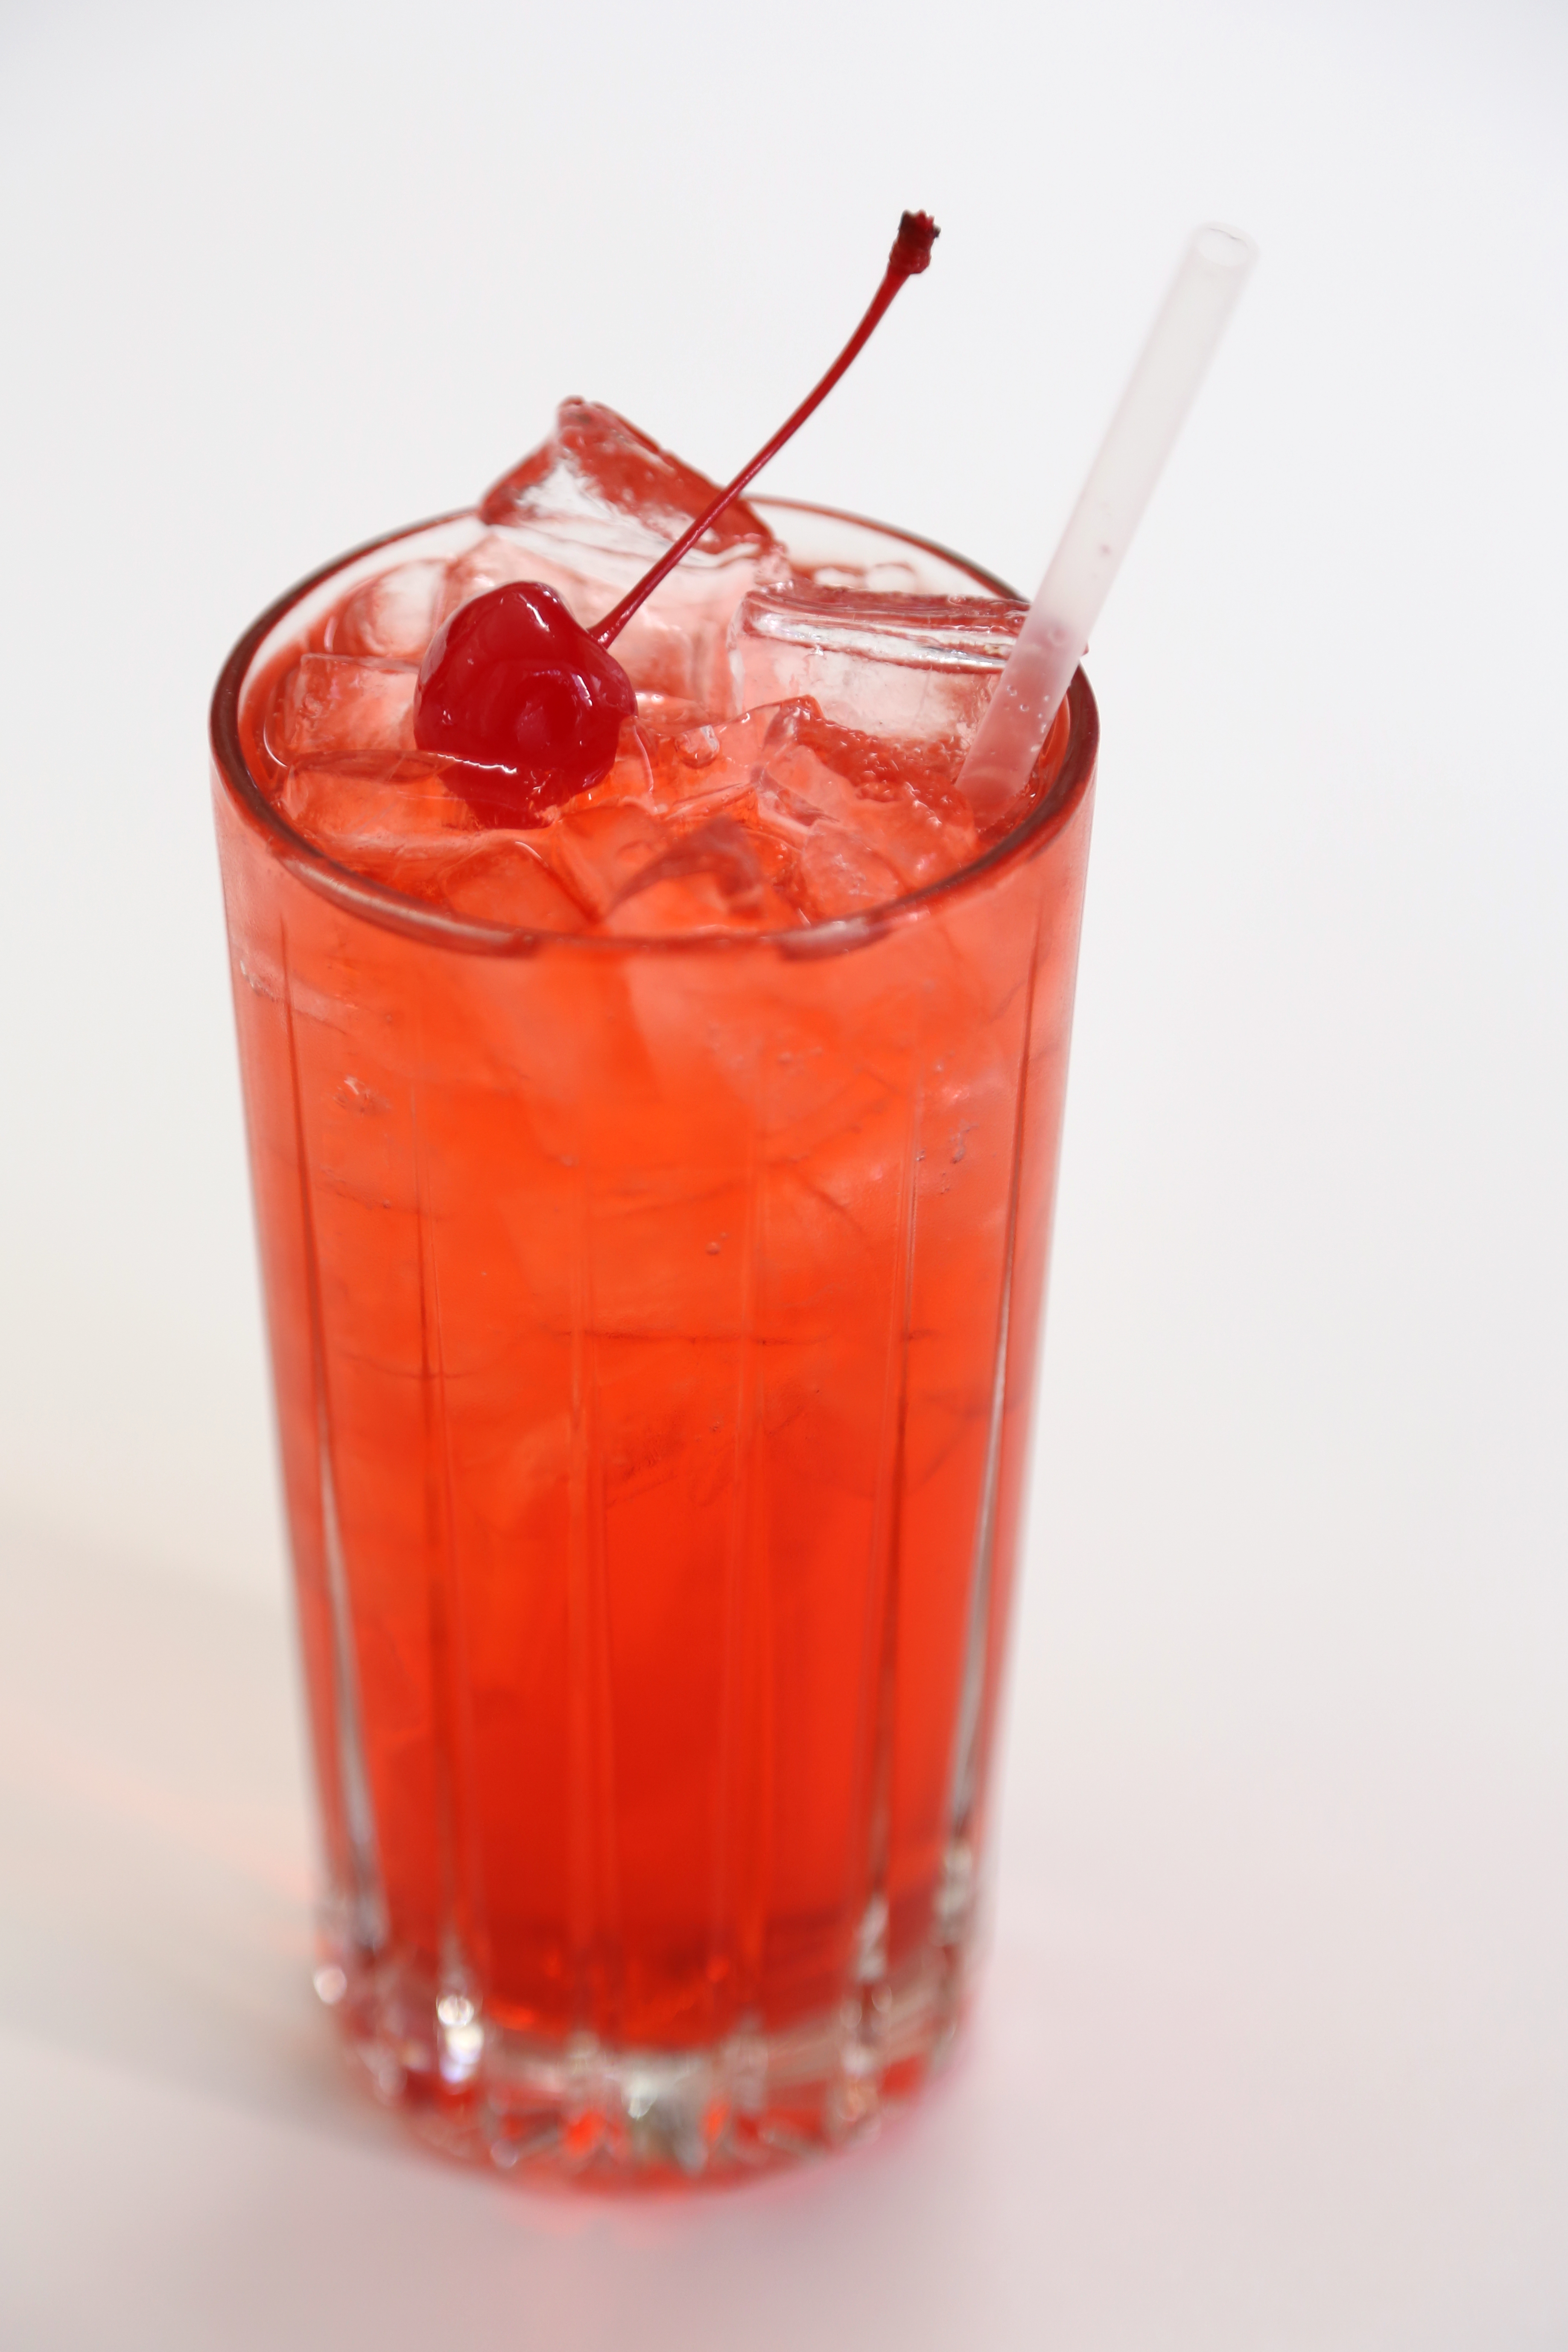 shirley temple alcoholic drink